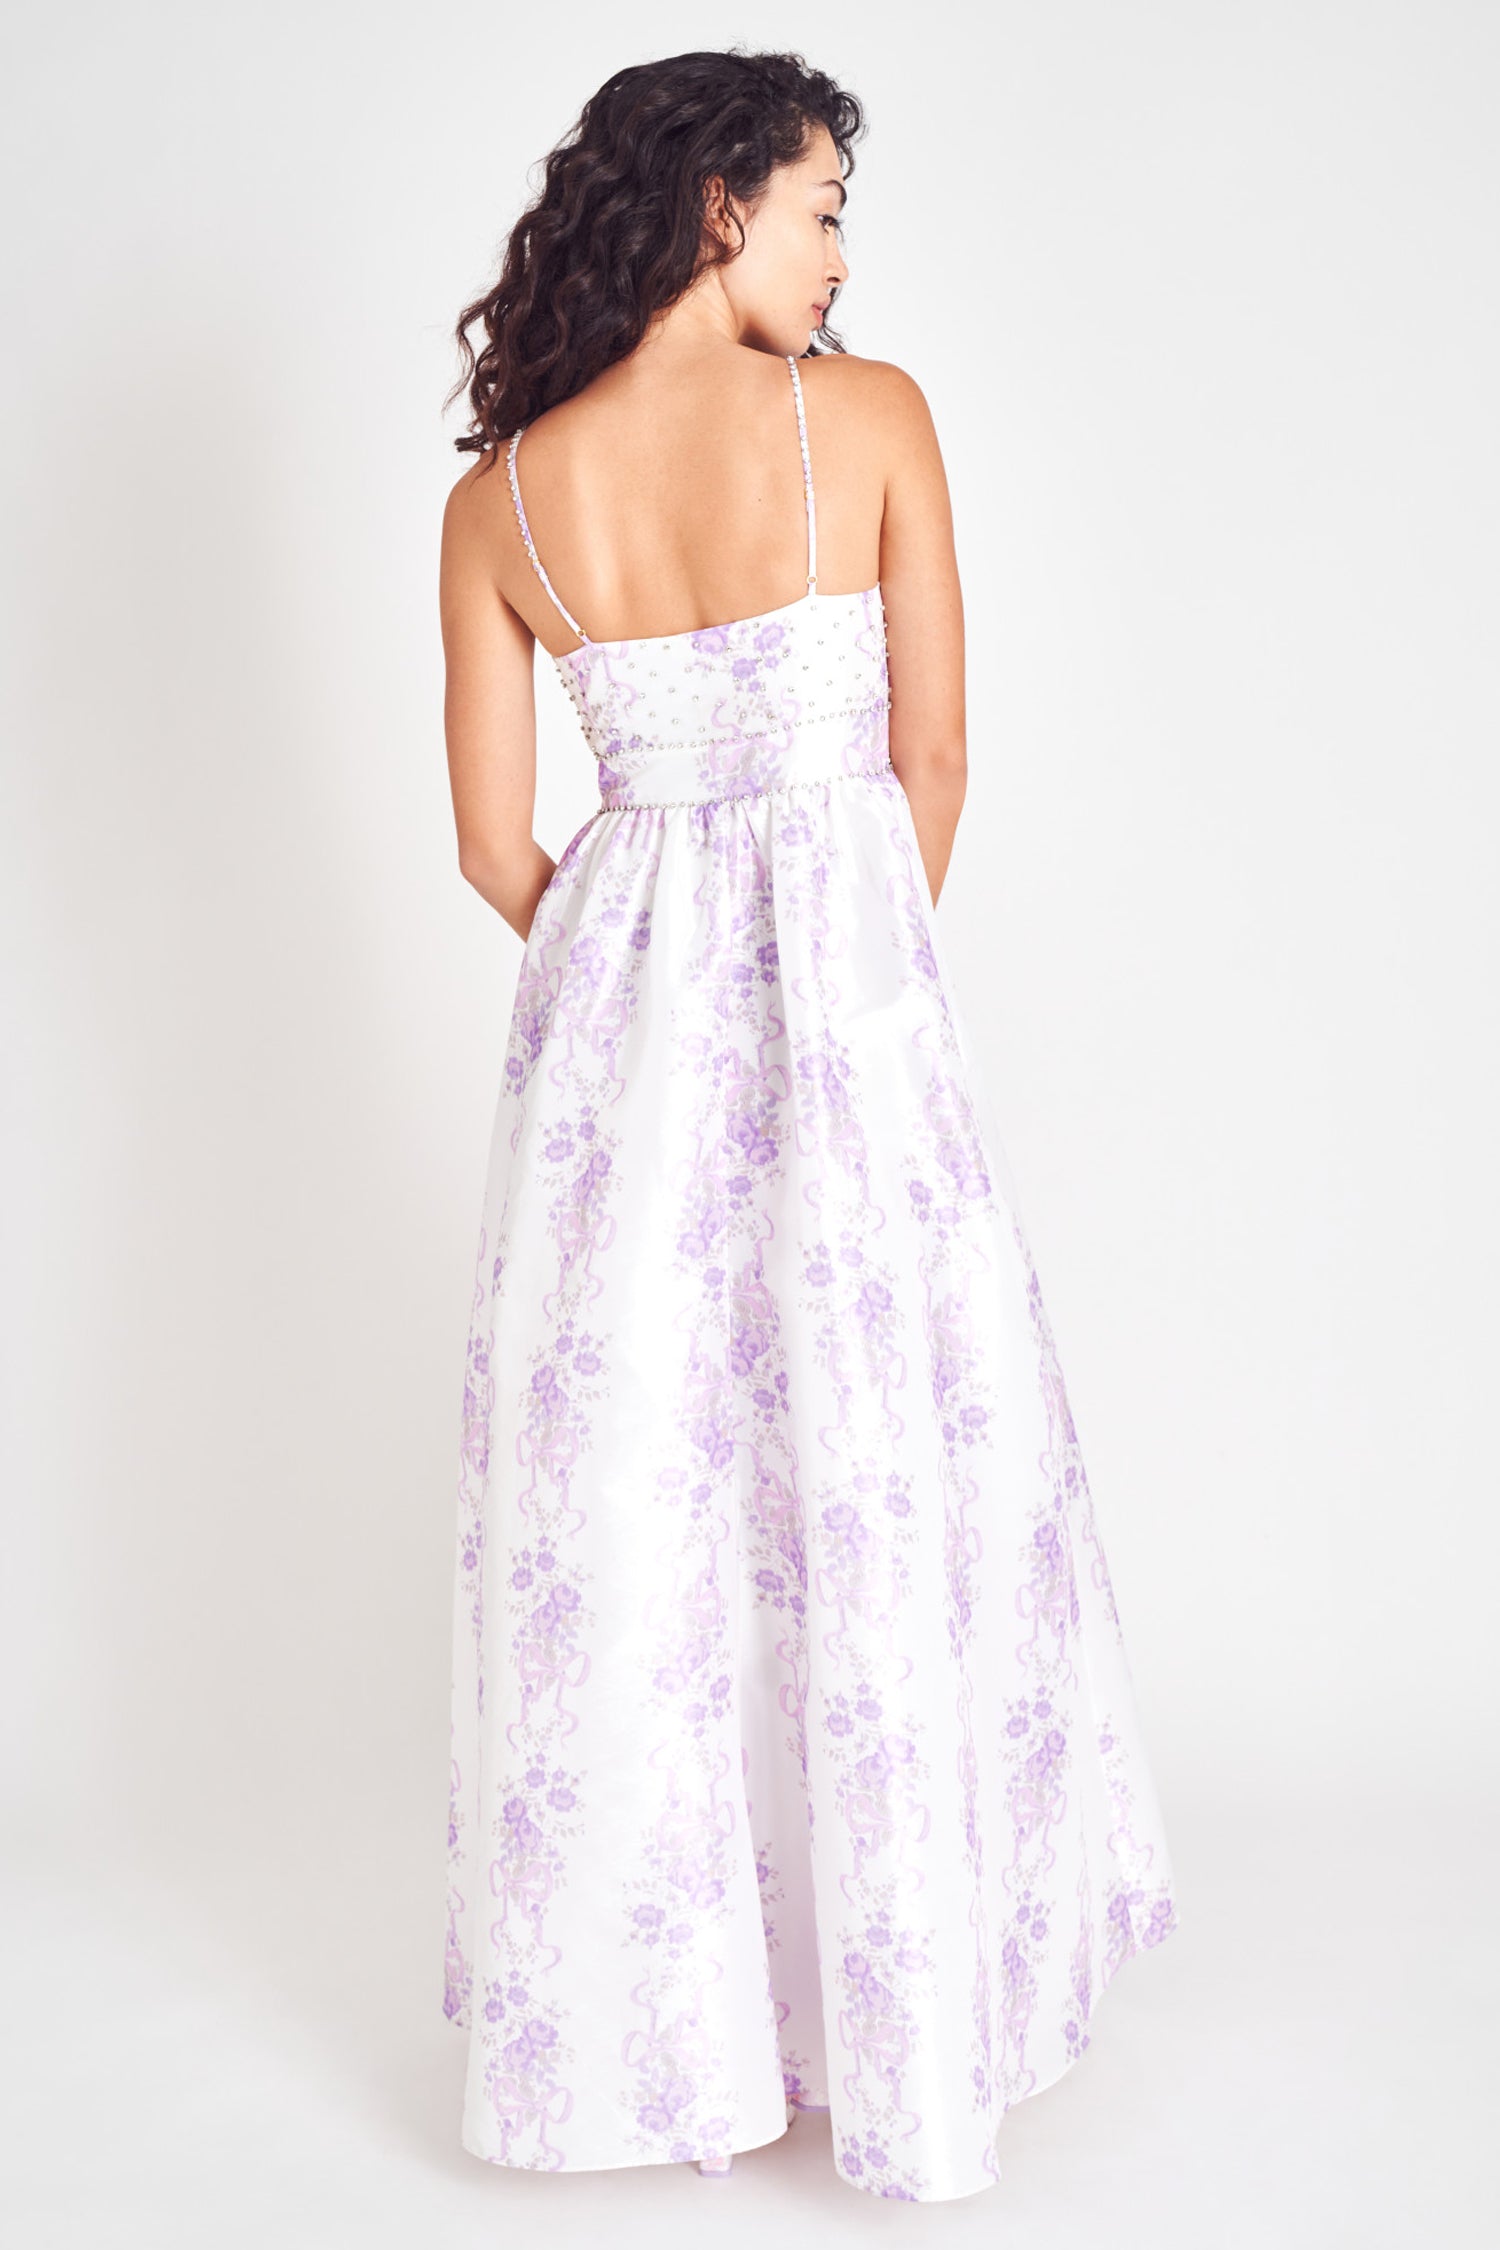 Lilac floral maxi dress with fitted waist and spaghetti straps.